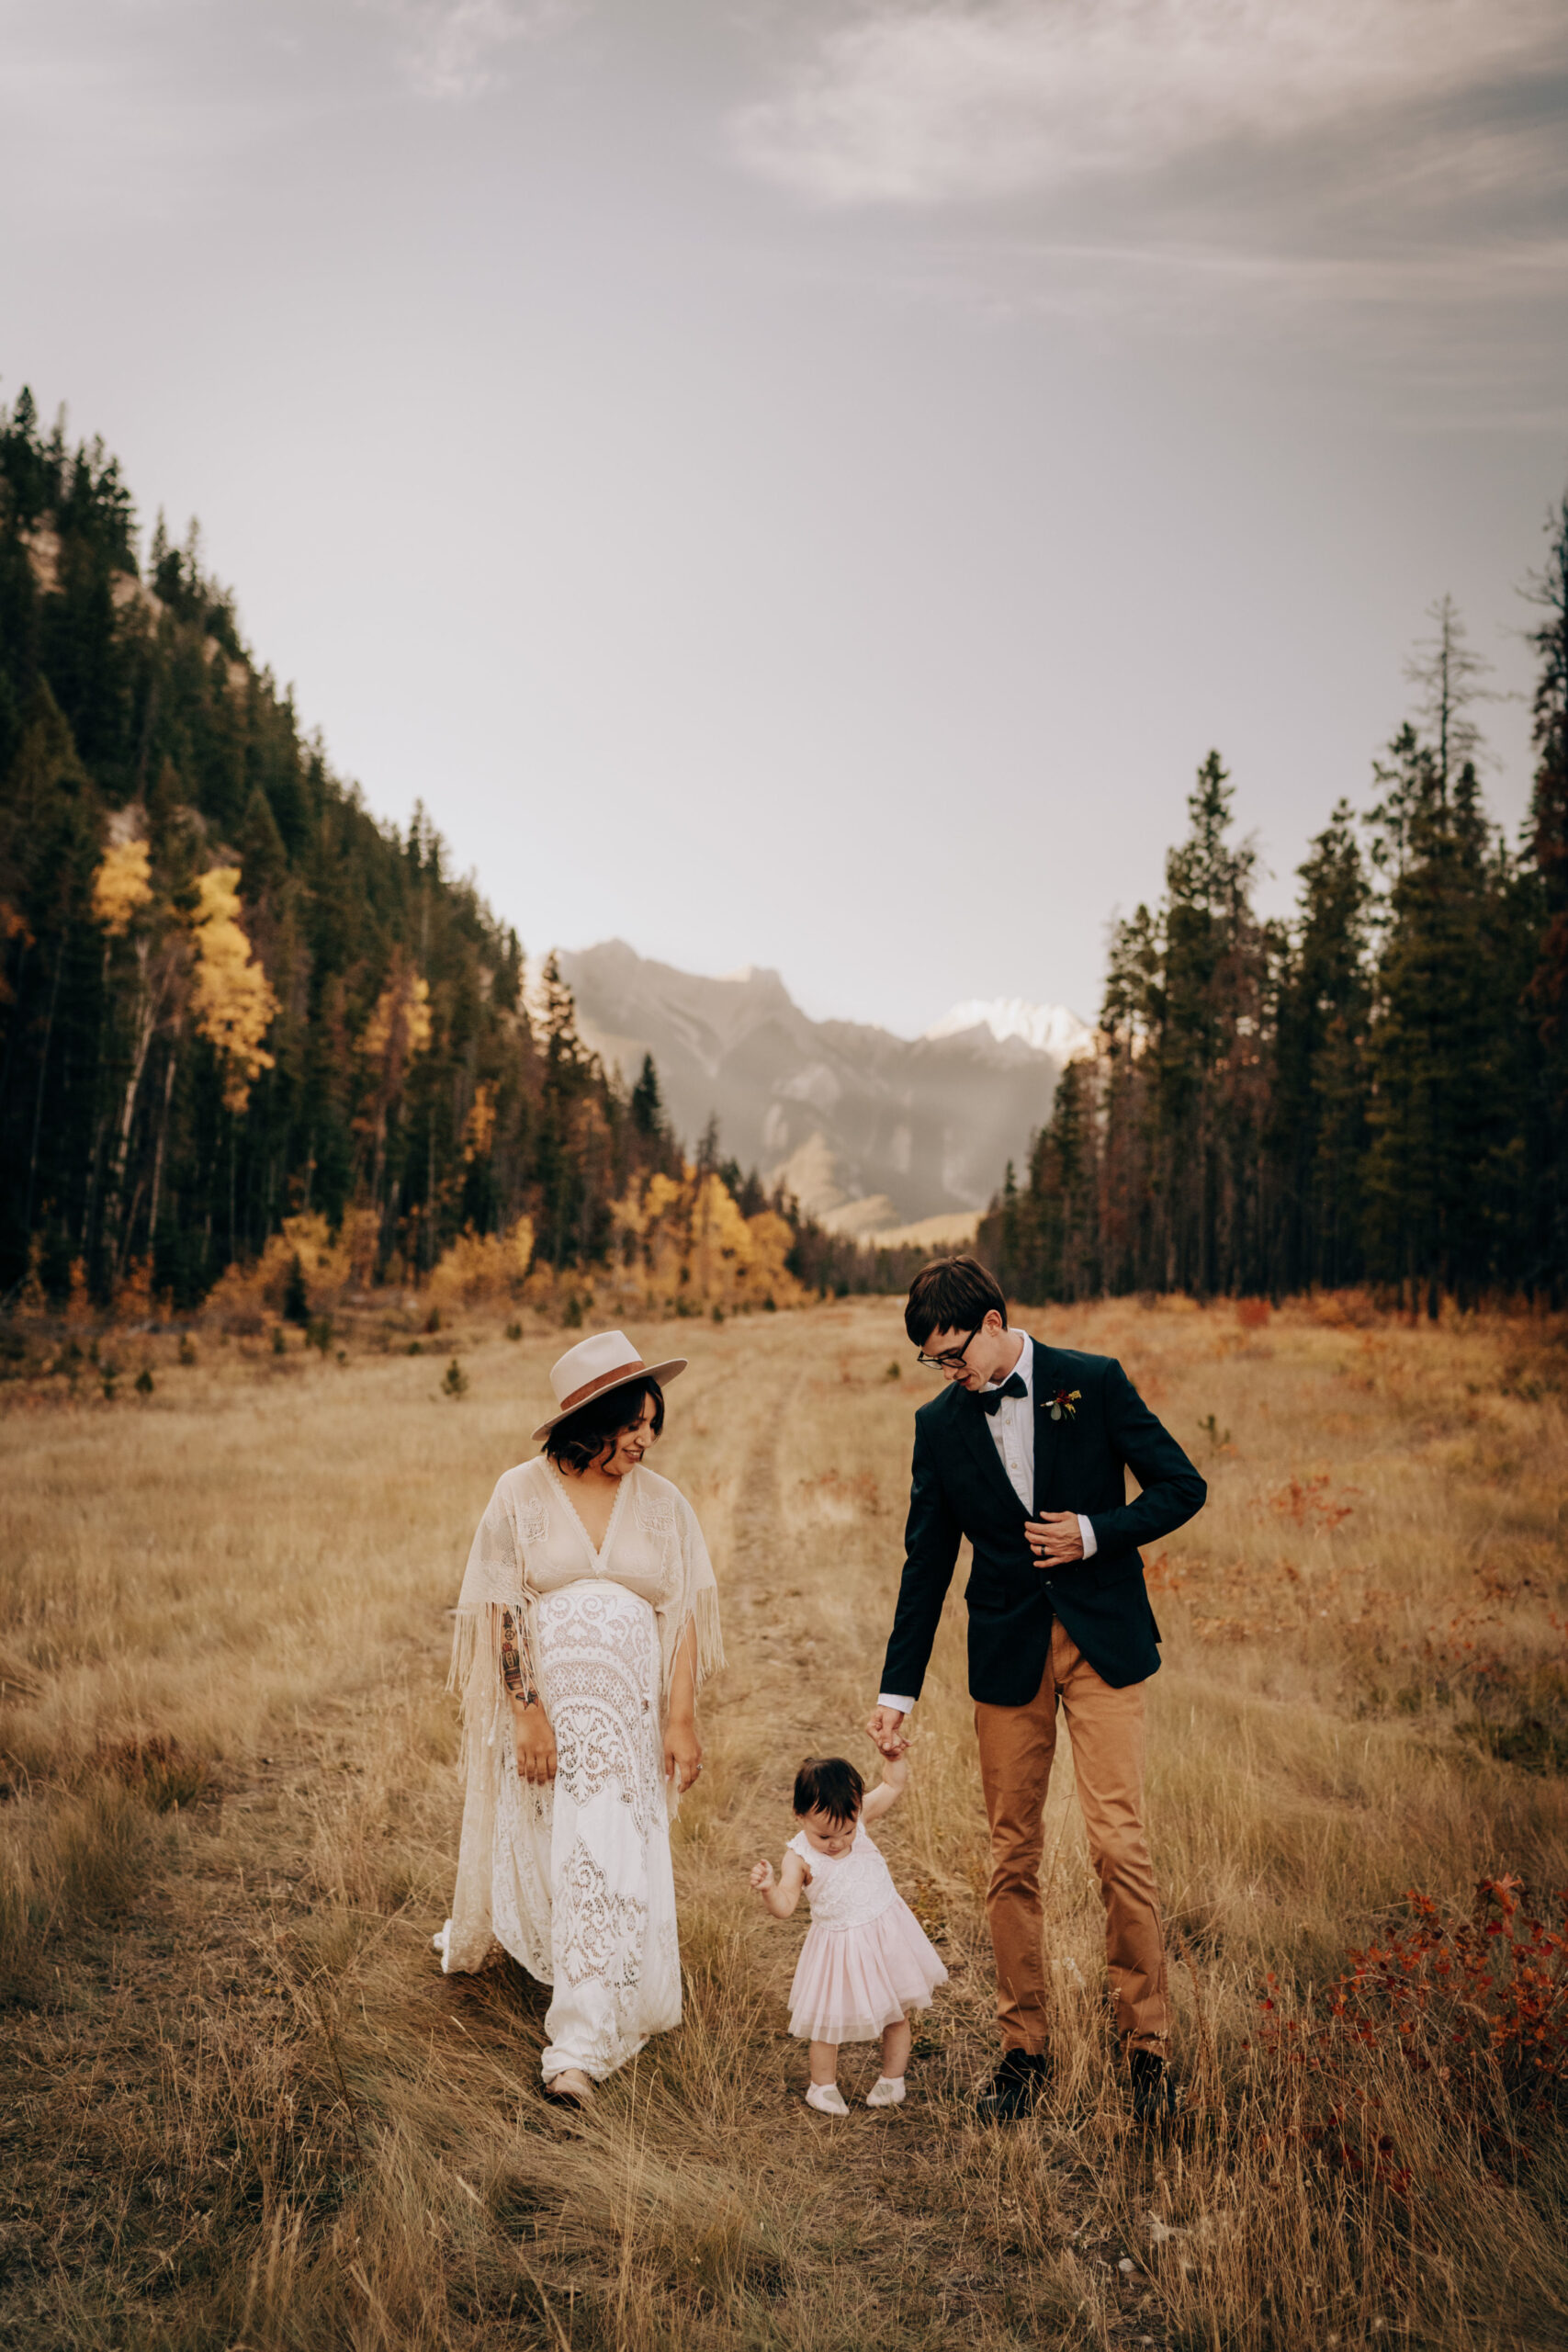 Boho bride and groom walking through valley holding hands with their boho baby